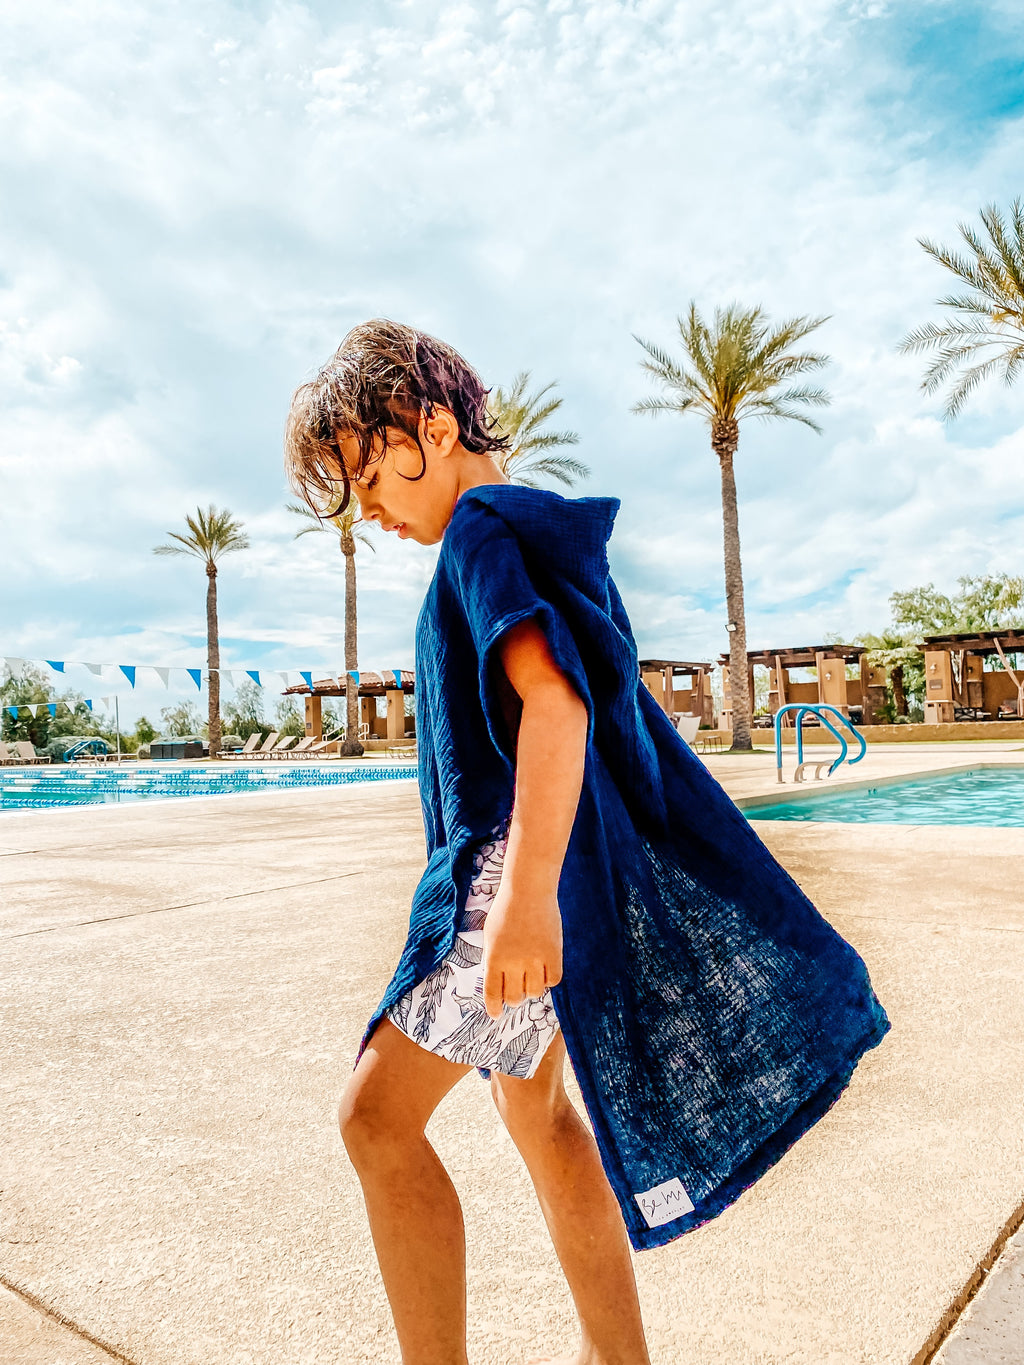 Keep Your Kids Warm and Cozy at the Beach with Our Beach Cover-Ups